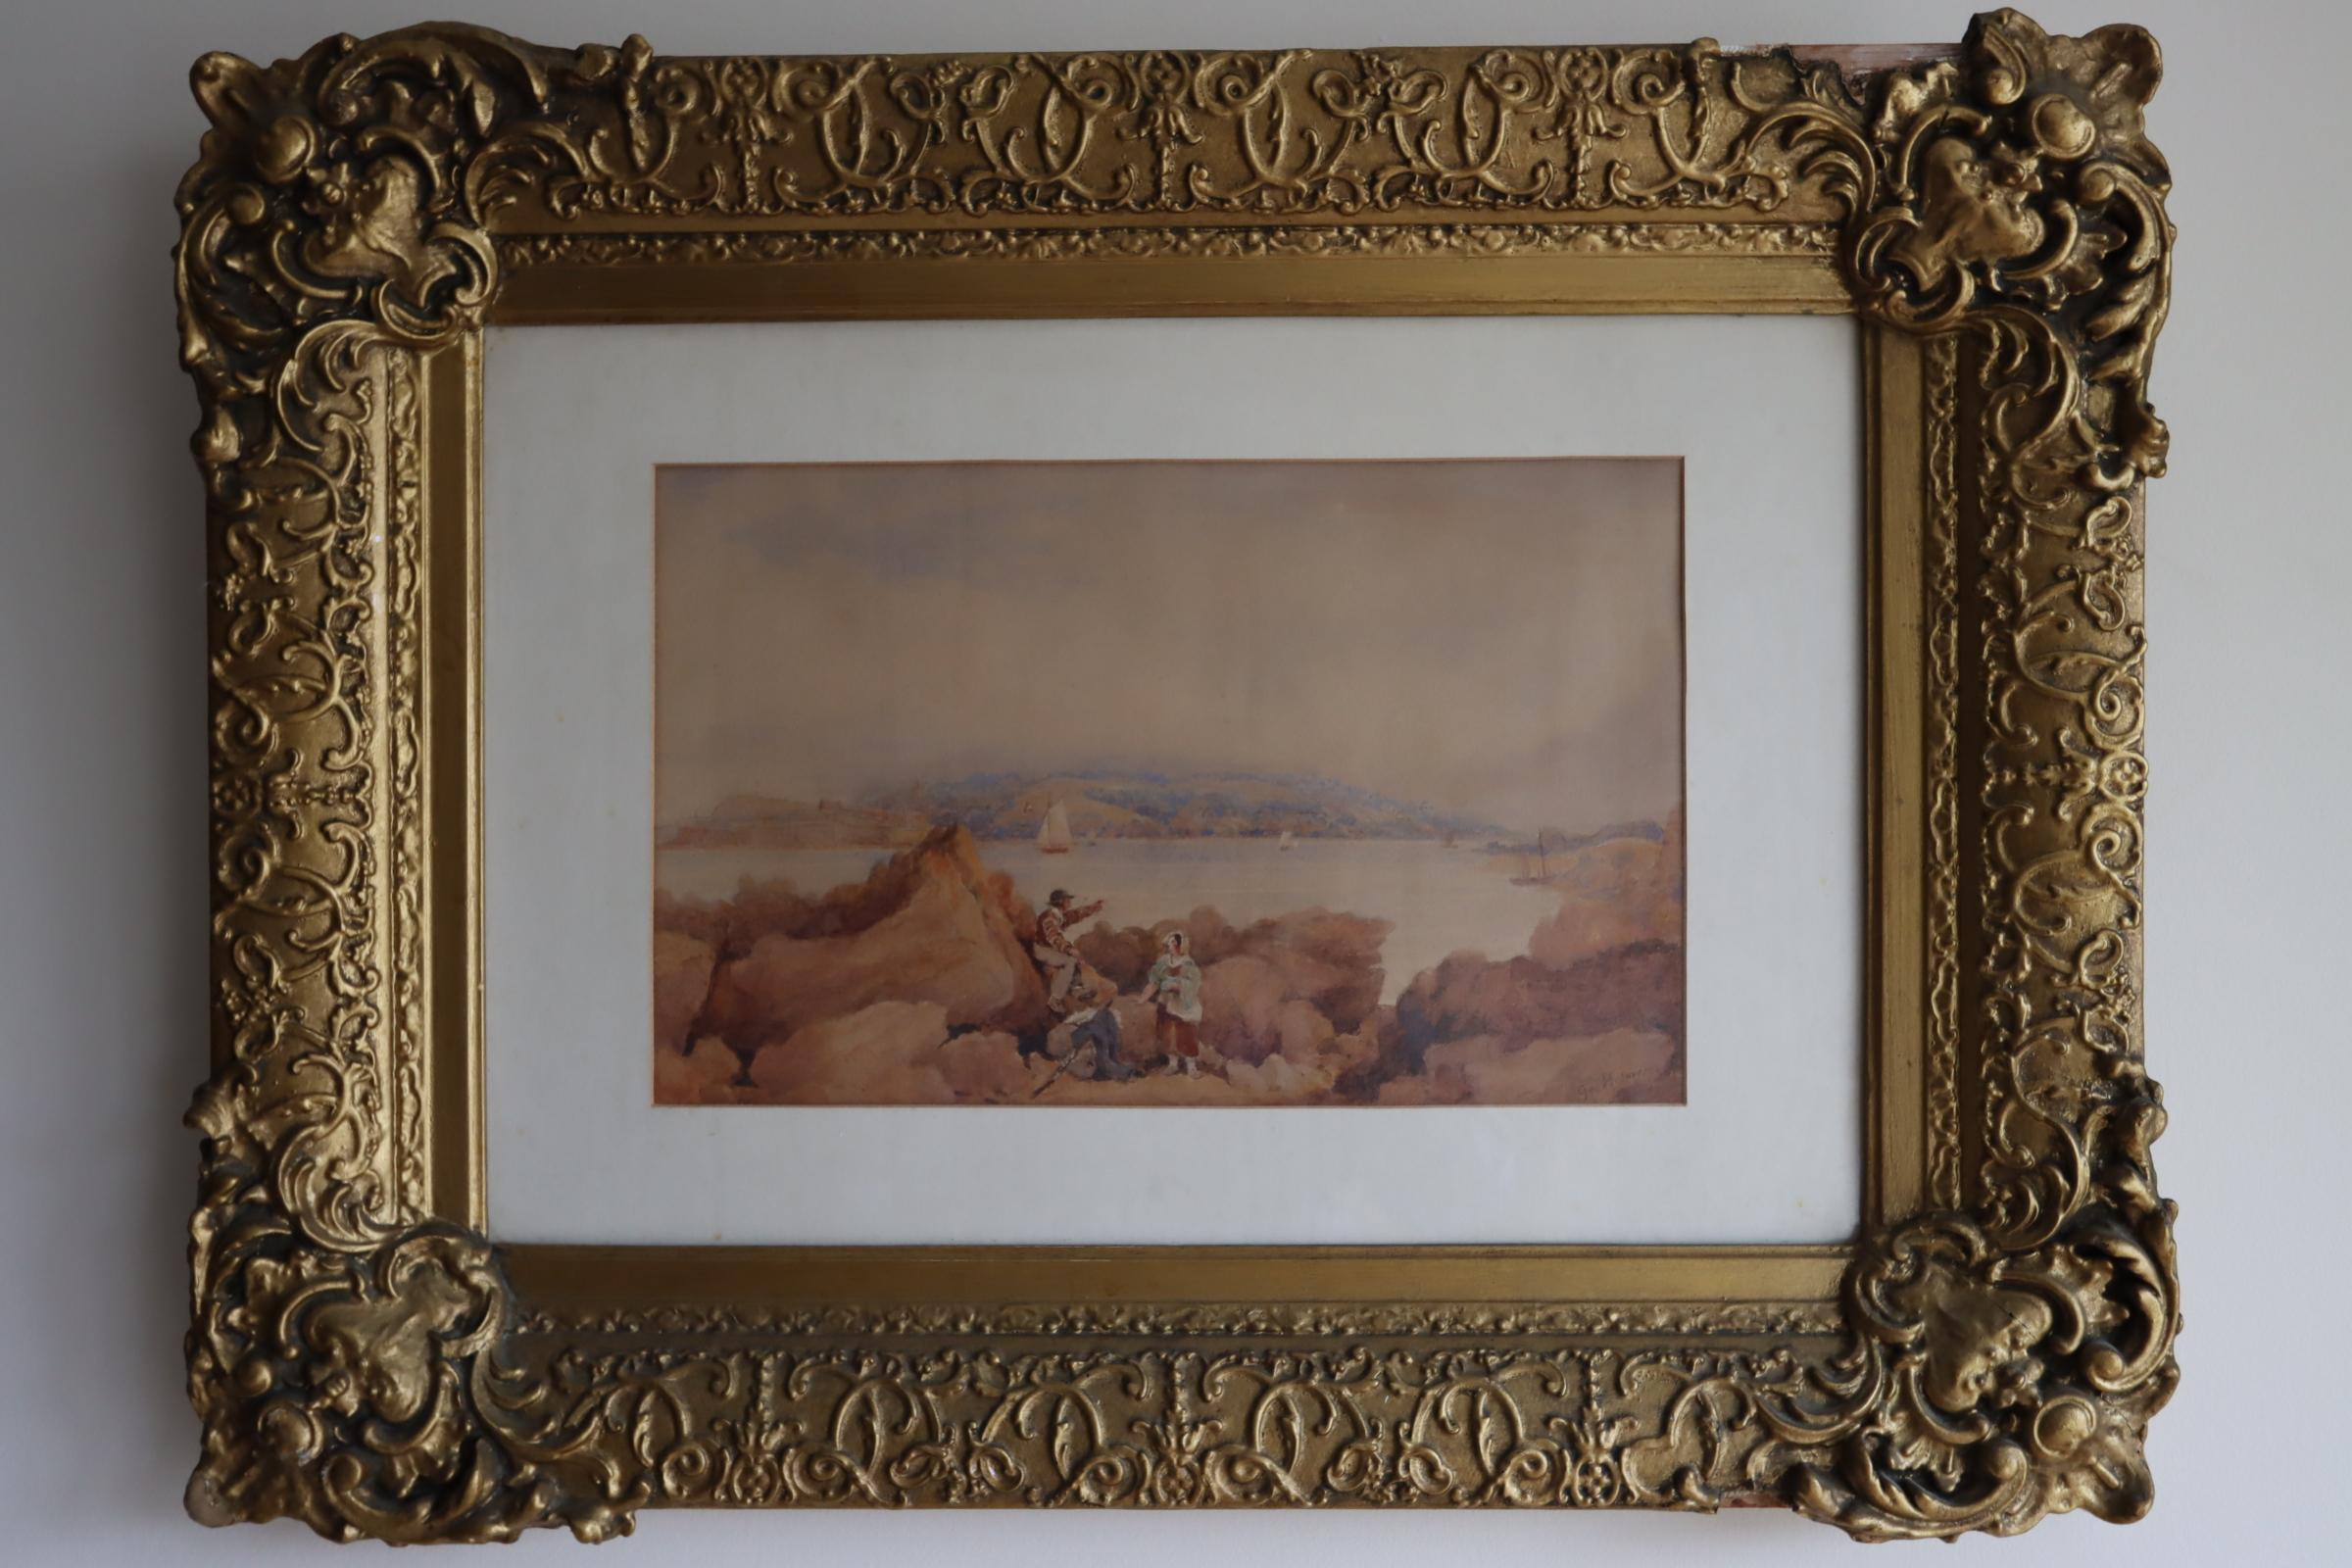 A gorgeous landscape watercolour.
Signed Gee Hemel
Watercolour
Unframed 14 x 9 inches
Framed 25.25 x 19 inches
Frame included
